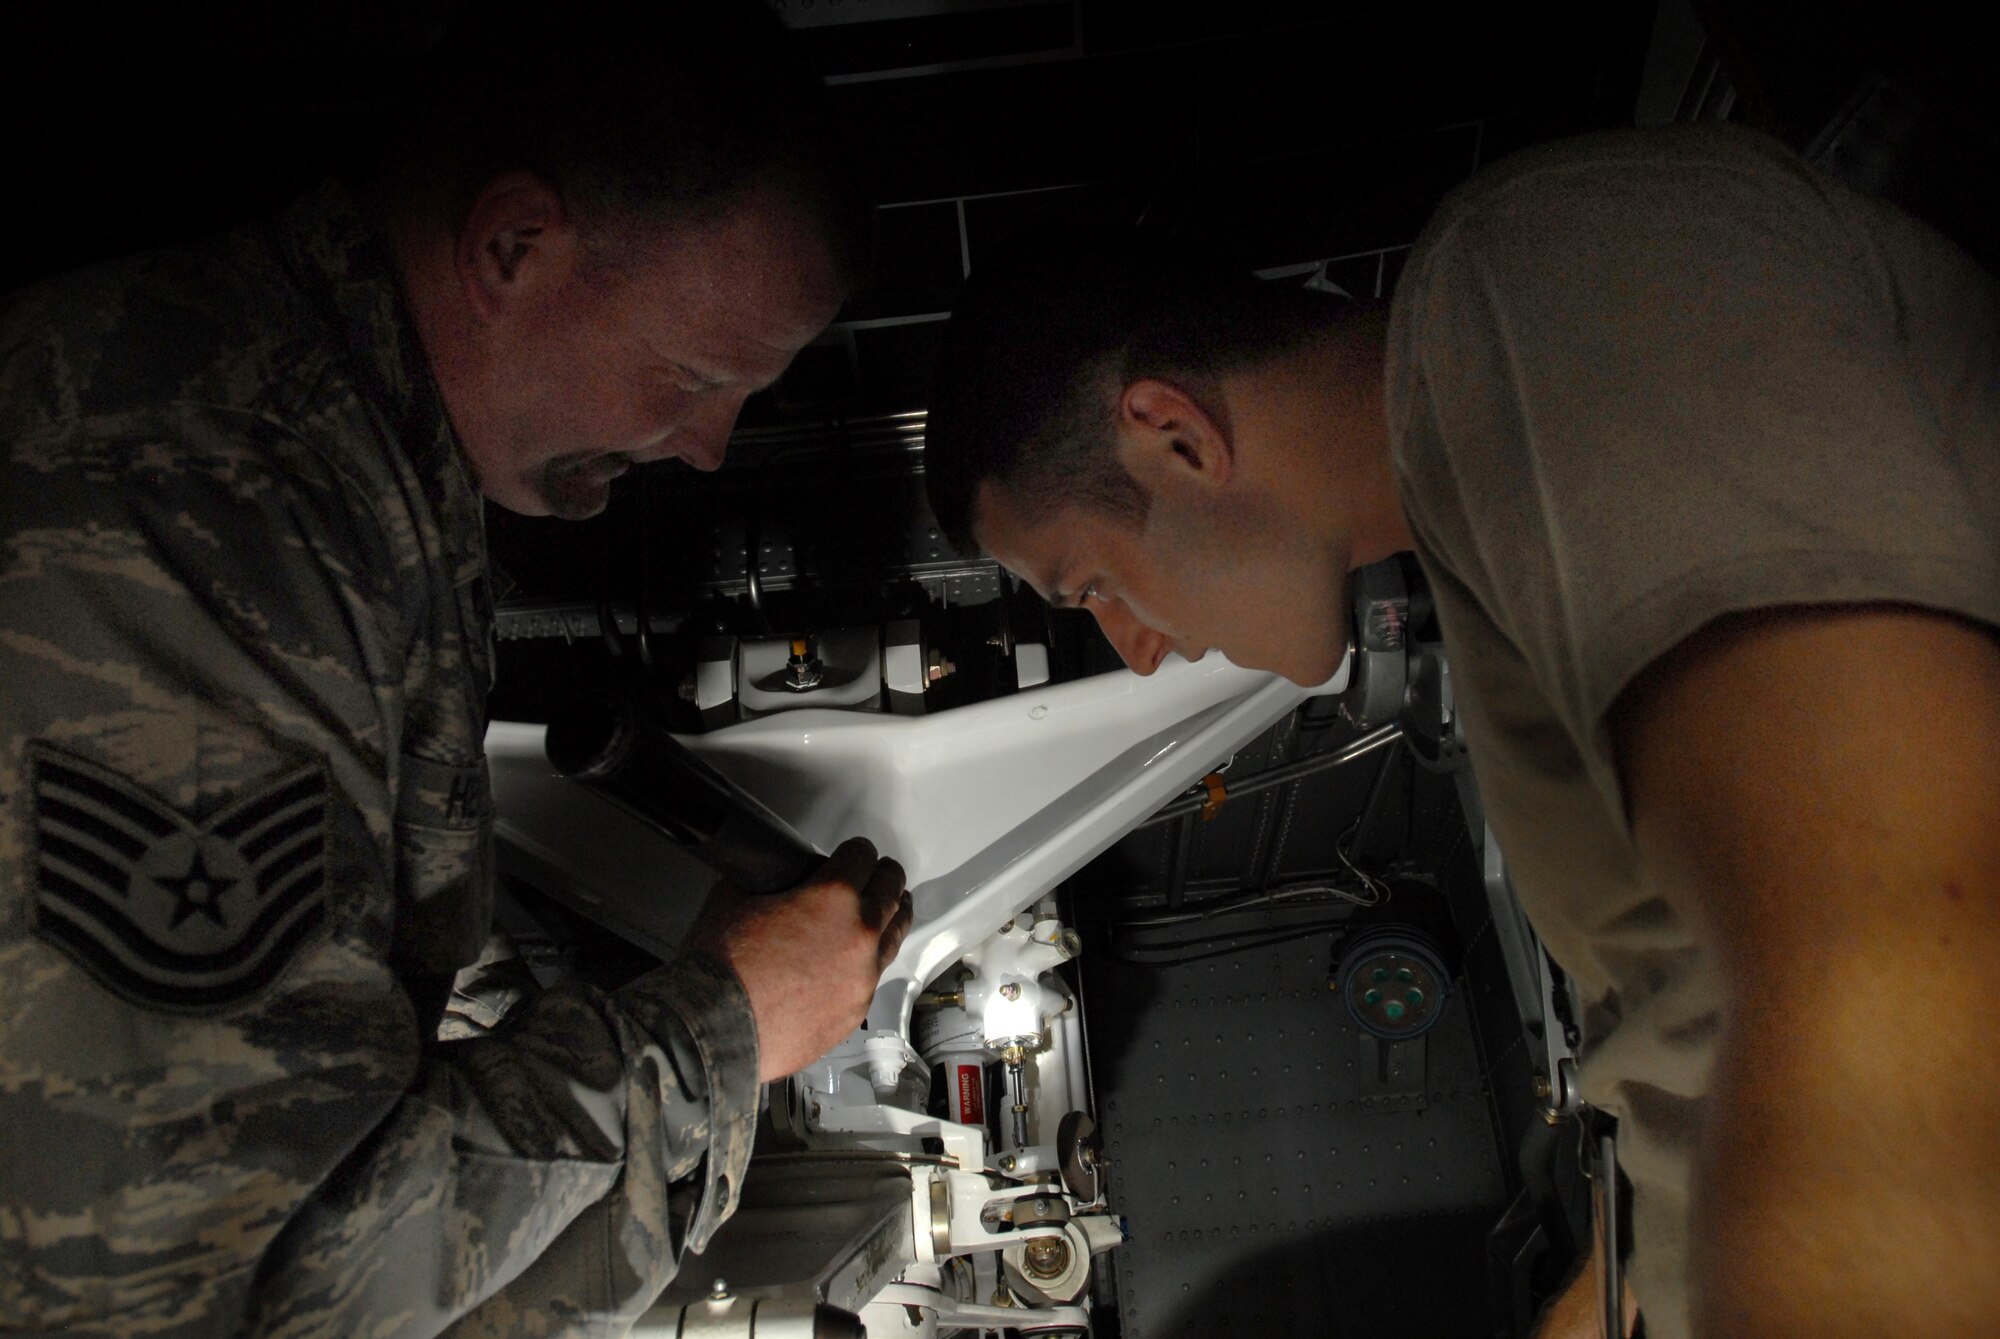 LITTLE ROCK AIR FORCE BASE, Ark.--Tech. Sgt Jason Hensel, 314th Maintenance Group instructs Senior Airman Derek Webb, 314th Maintenance Squadron, about breaks on the C-130 on the flightline on July 29, 2008.  (U.S. Air Force photo by Senior Airman Christine Clark)(Released)